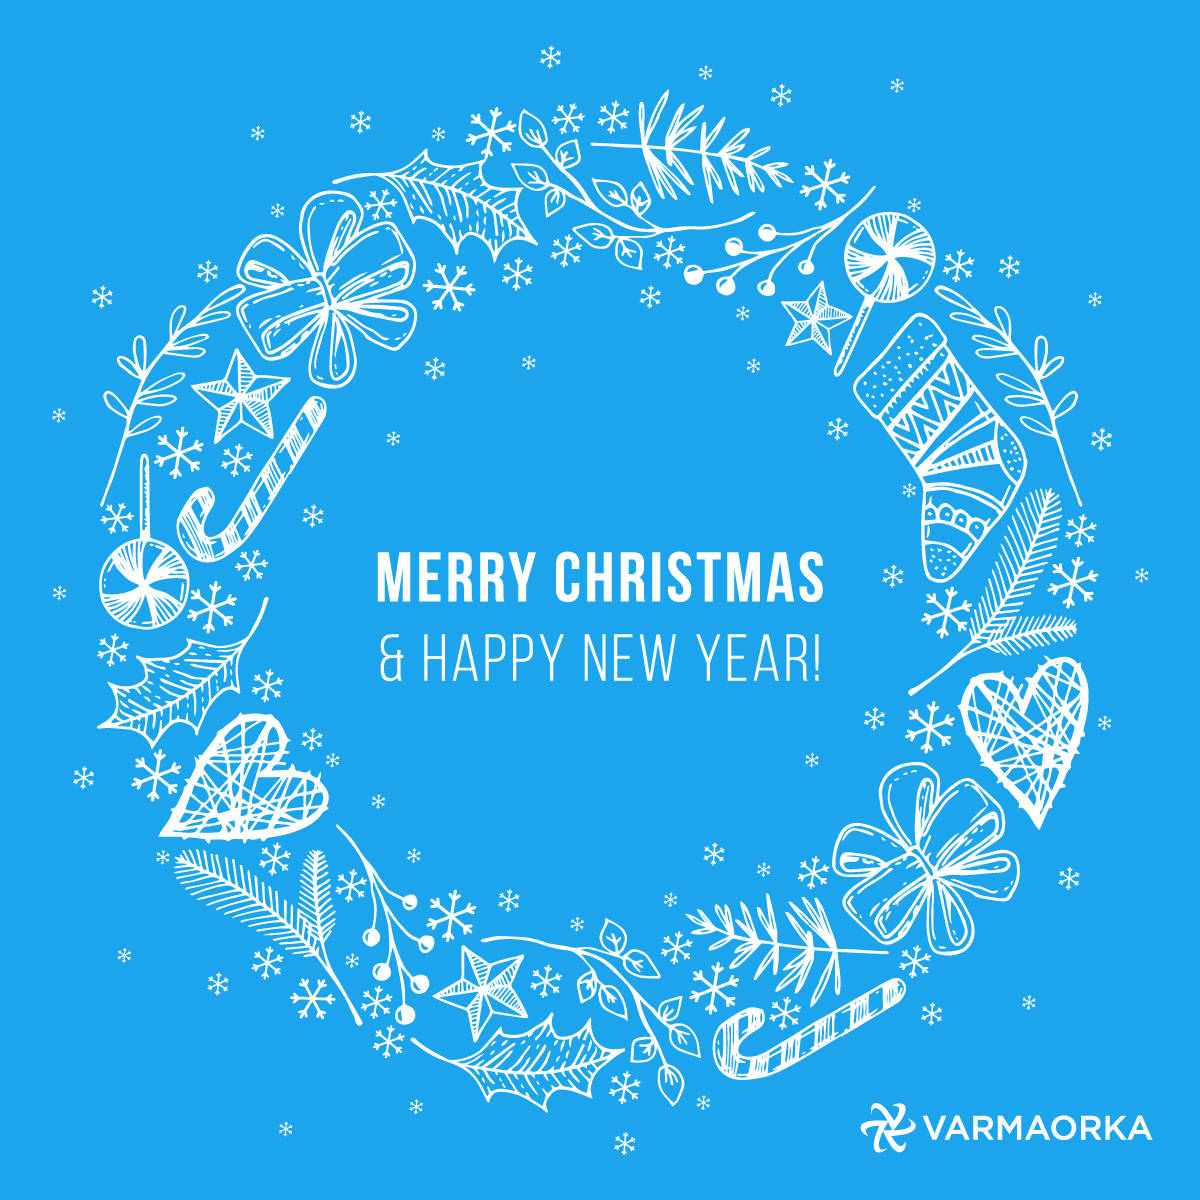 The year is soon coming to an end, we would like to thank all our friends, partners and clients for your continued support!

We wish you all a Merry Christmas, and a safe, happy and prosperous New Year of 2022!